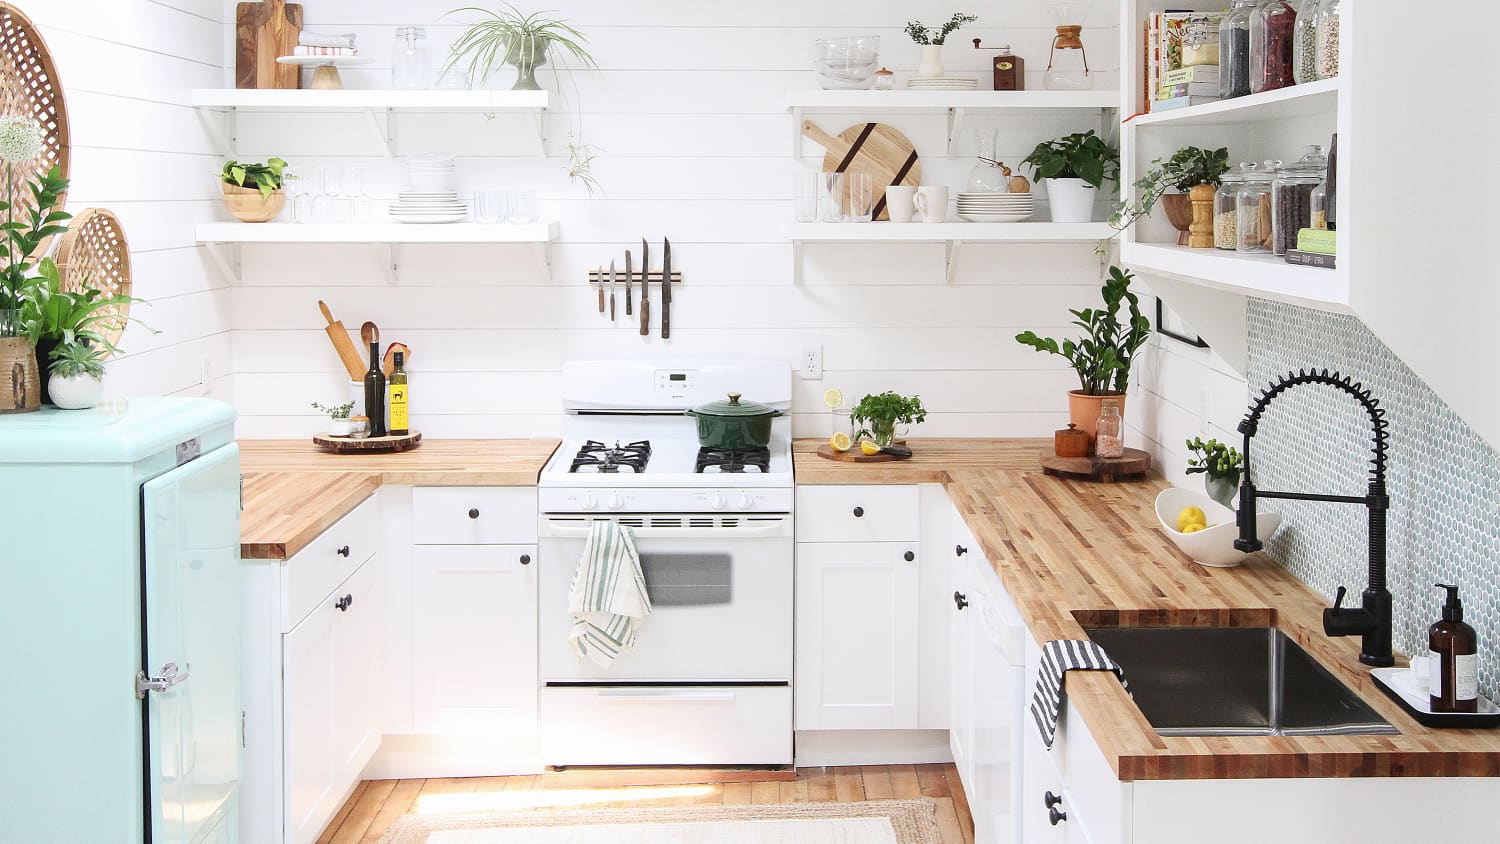 Want to Refresh Your Kitchen?